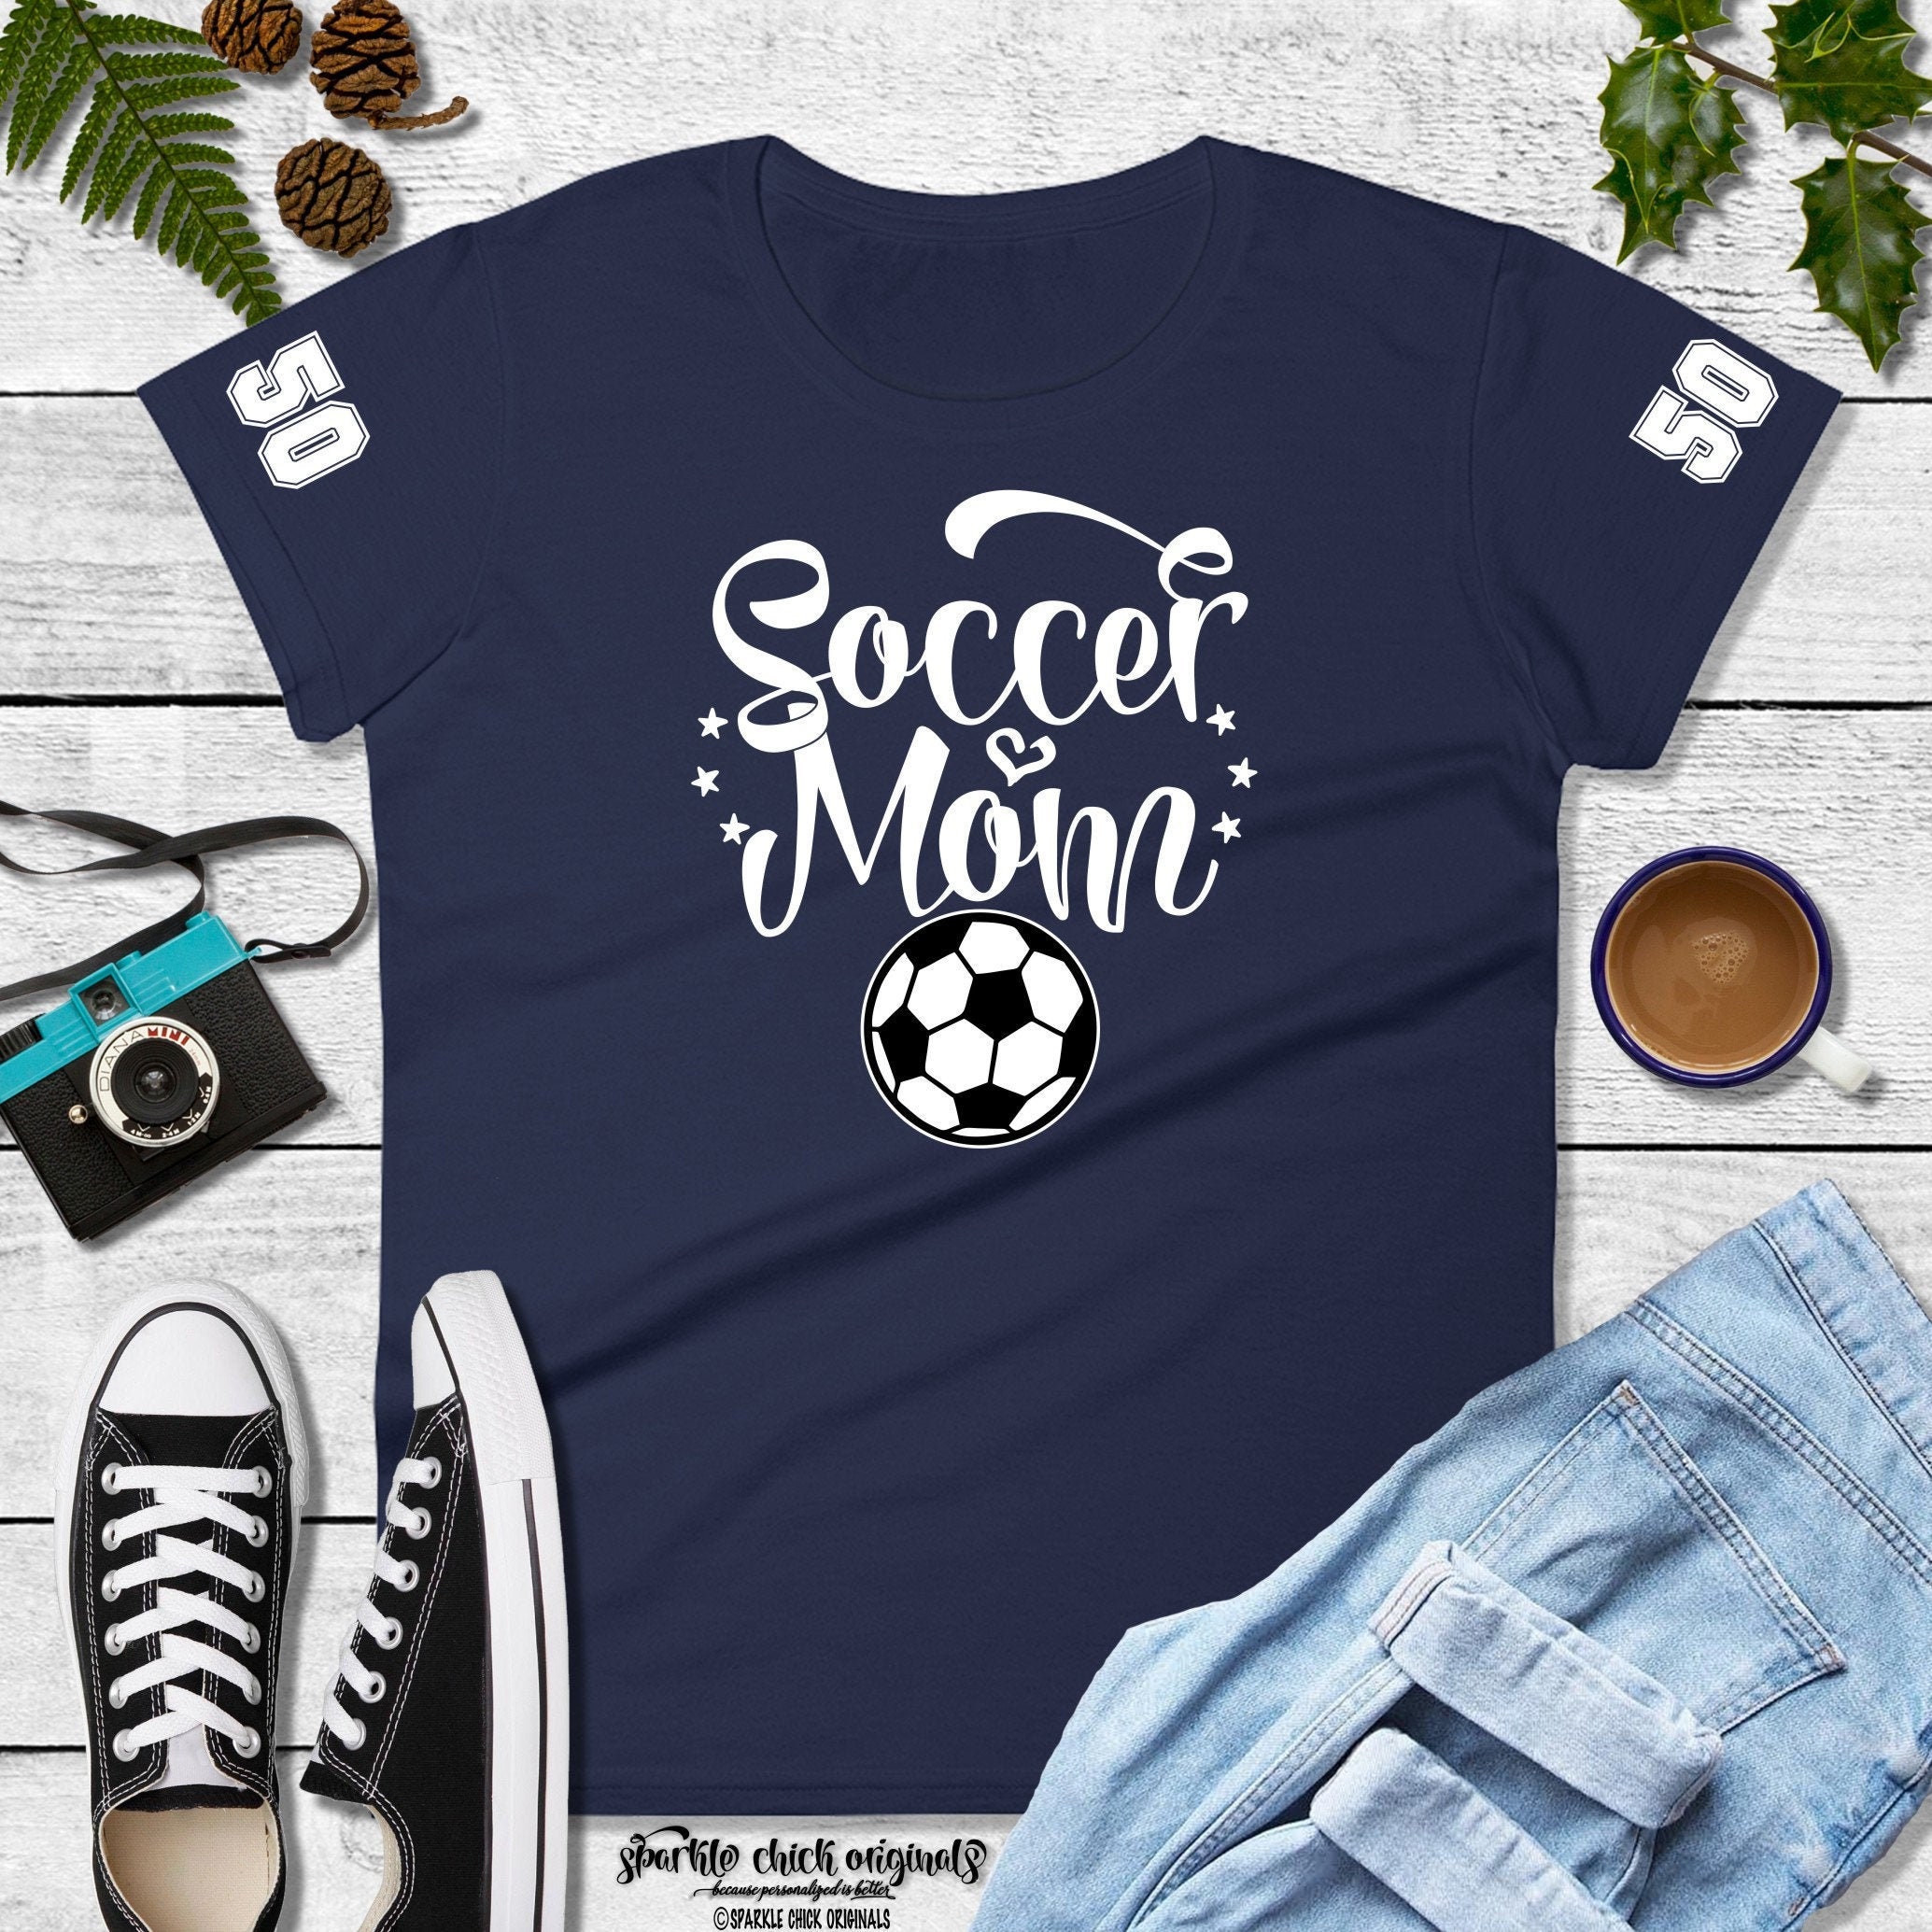 Custom Colors Available Personalized Soccer Mom Shirts Custom Soccer Mom Tee Soccer T-Shirt 5XL Sizes Small